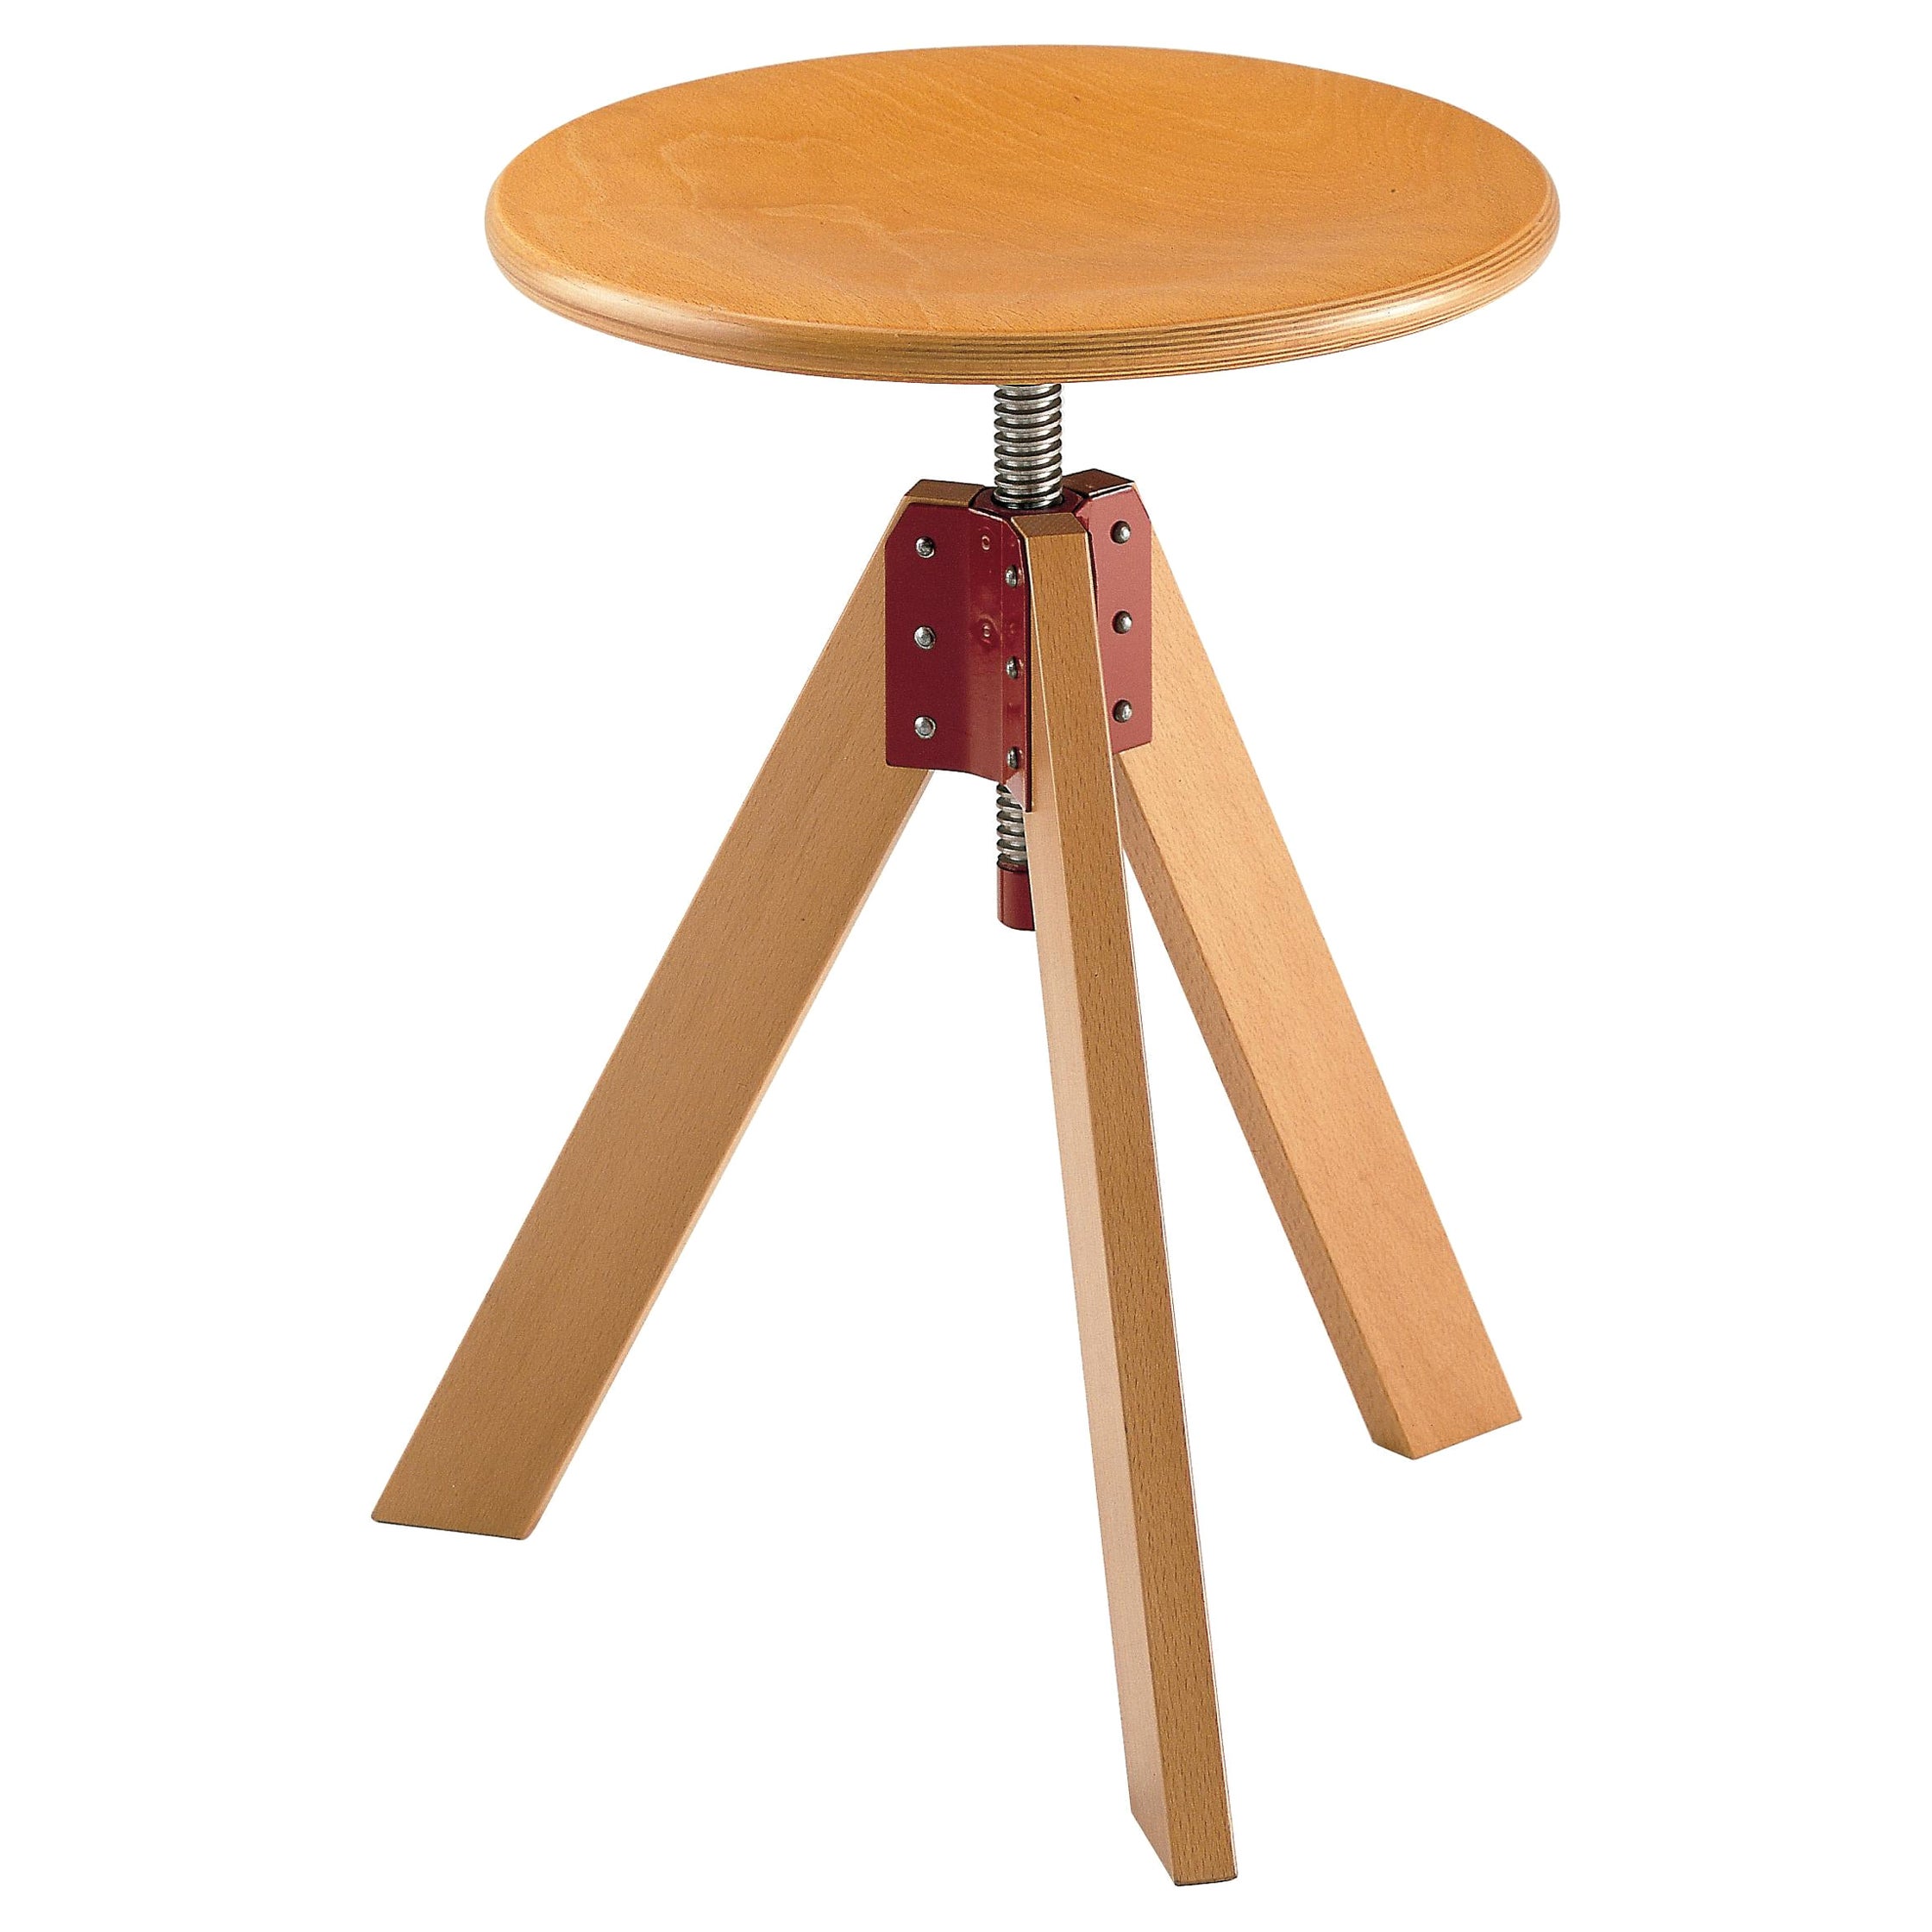 Zanotta Giotto Stool in Natural Varnished Beech Frame with Red Bracket